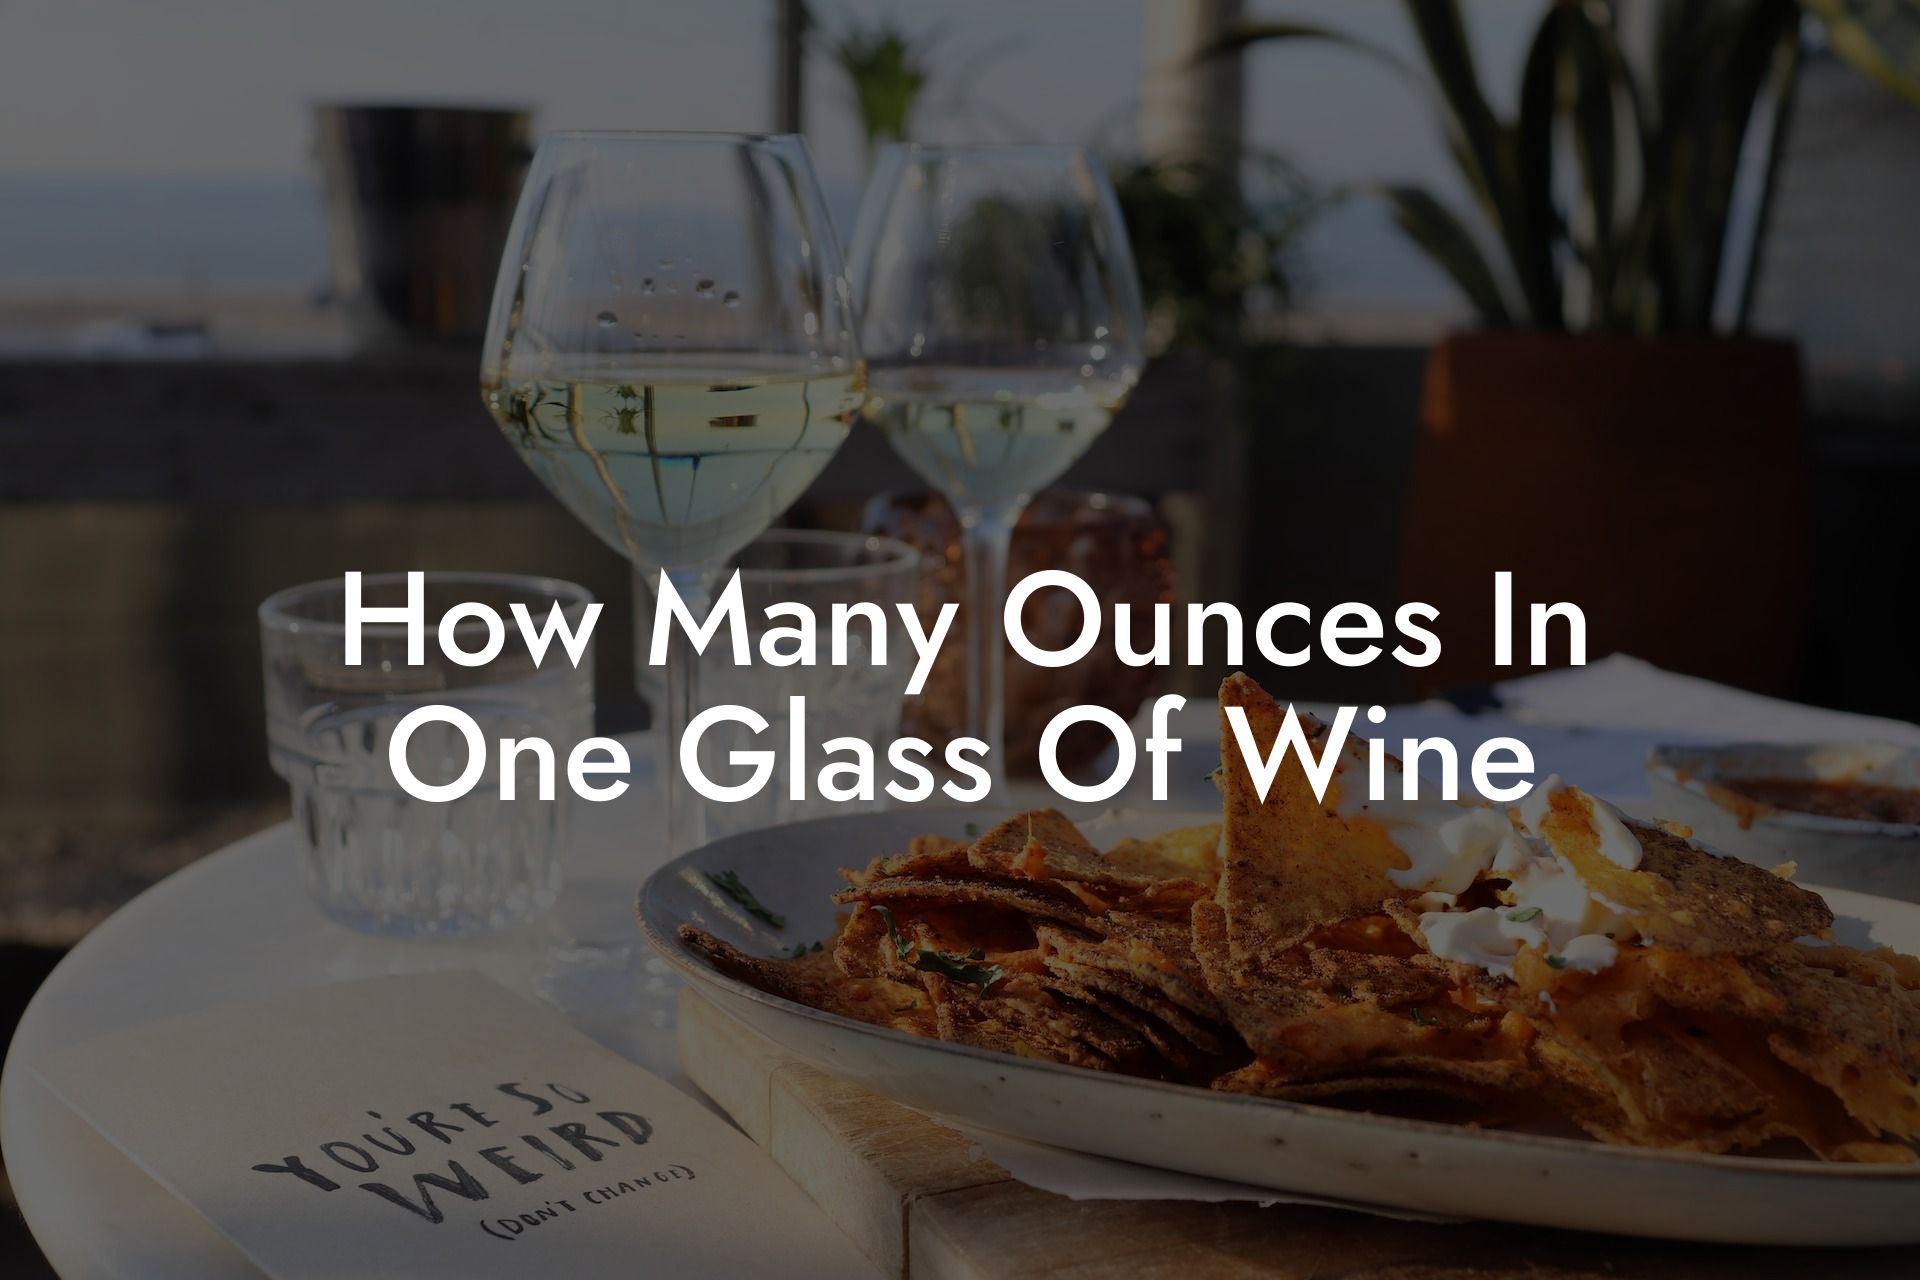 How Many Ounces In One Glass Of Wine